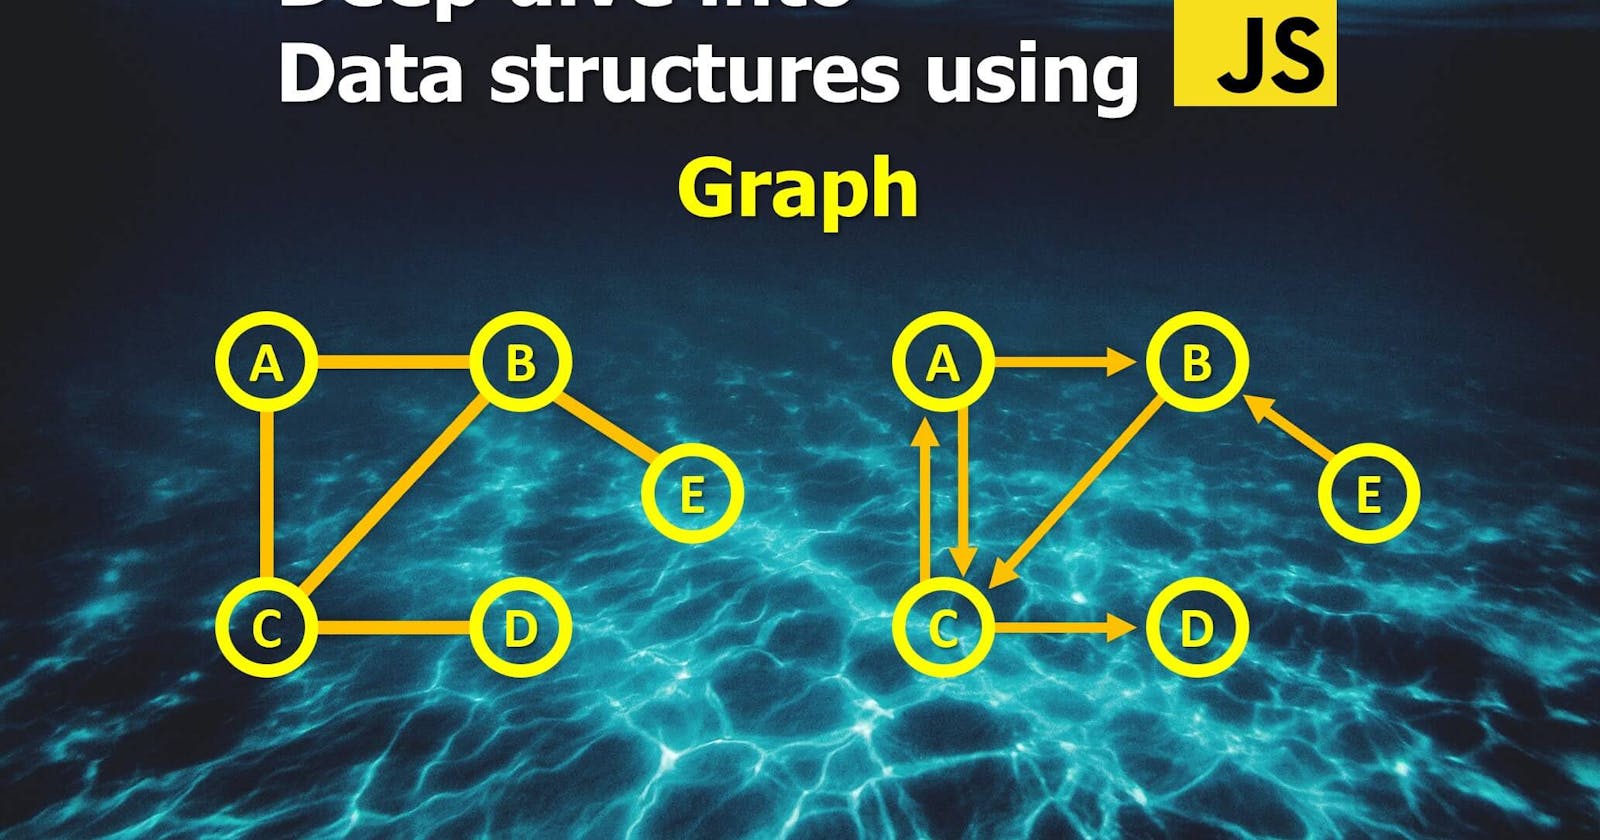 Deep Dive into Data structures using Javascript - Graph